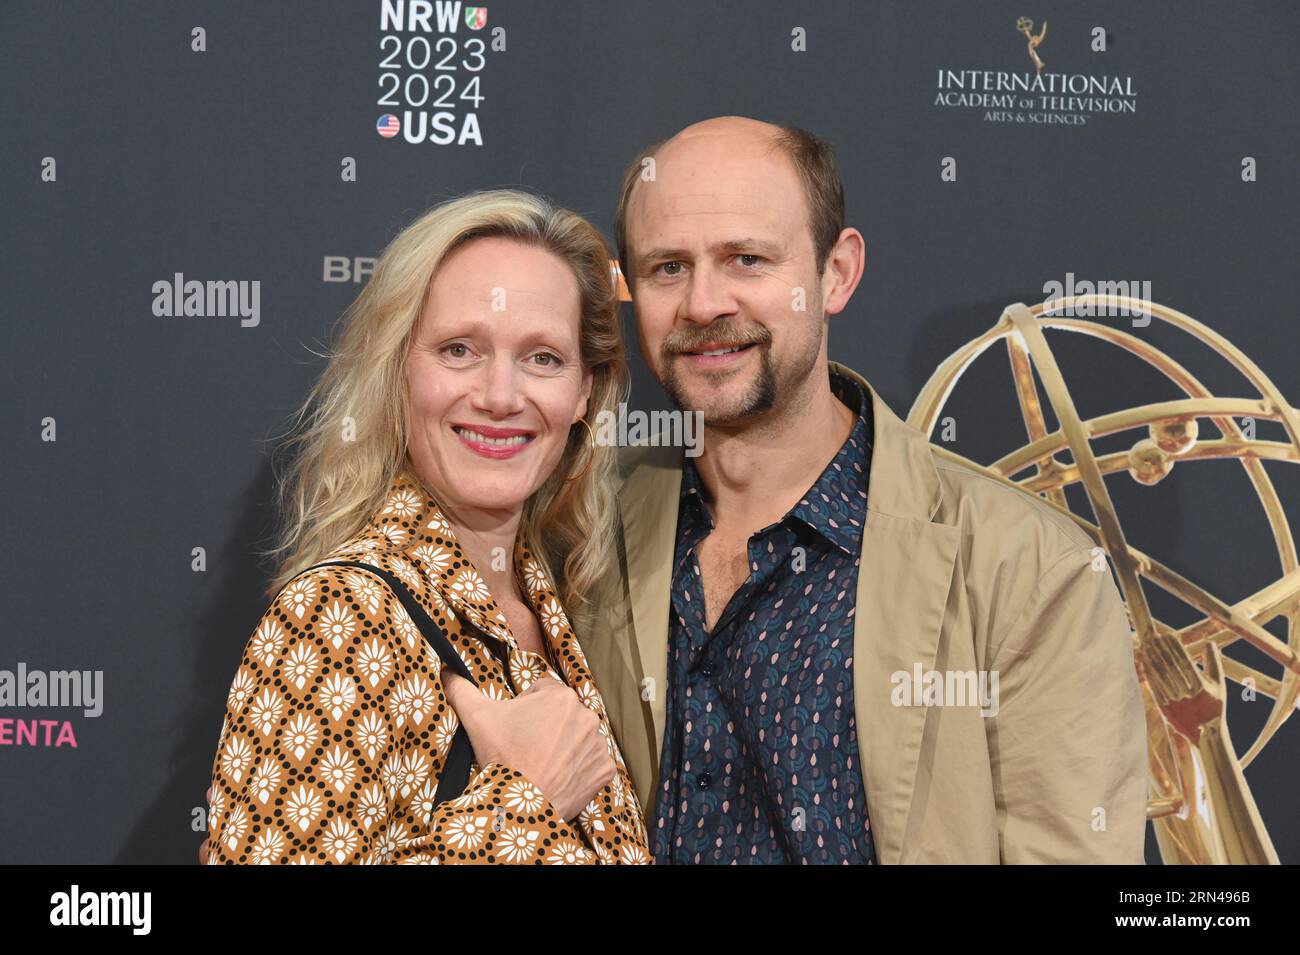 Cologne, Germany. 30th Aug, 2023. Actors Anna Schudt and Moritz Führmann arrive at the evening event on the occasion of the jury session for the international Emmy Awards 2023 - Semi Final round of Judging of the international Emmy Awards at Schloss Arff. Credit: Horst Galuschka/dpa/Alamy Live News Stock Photo